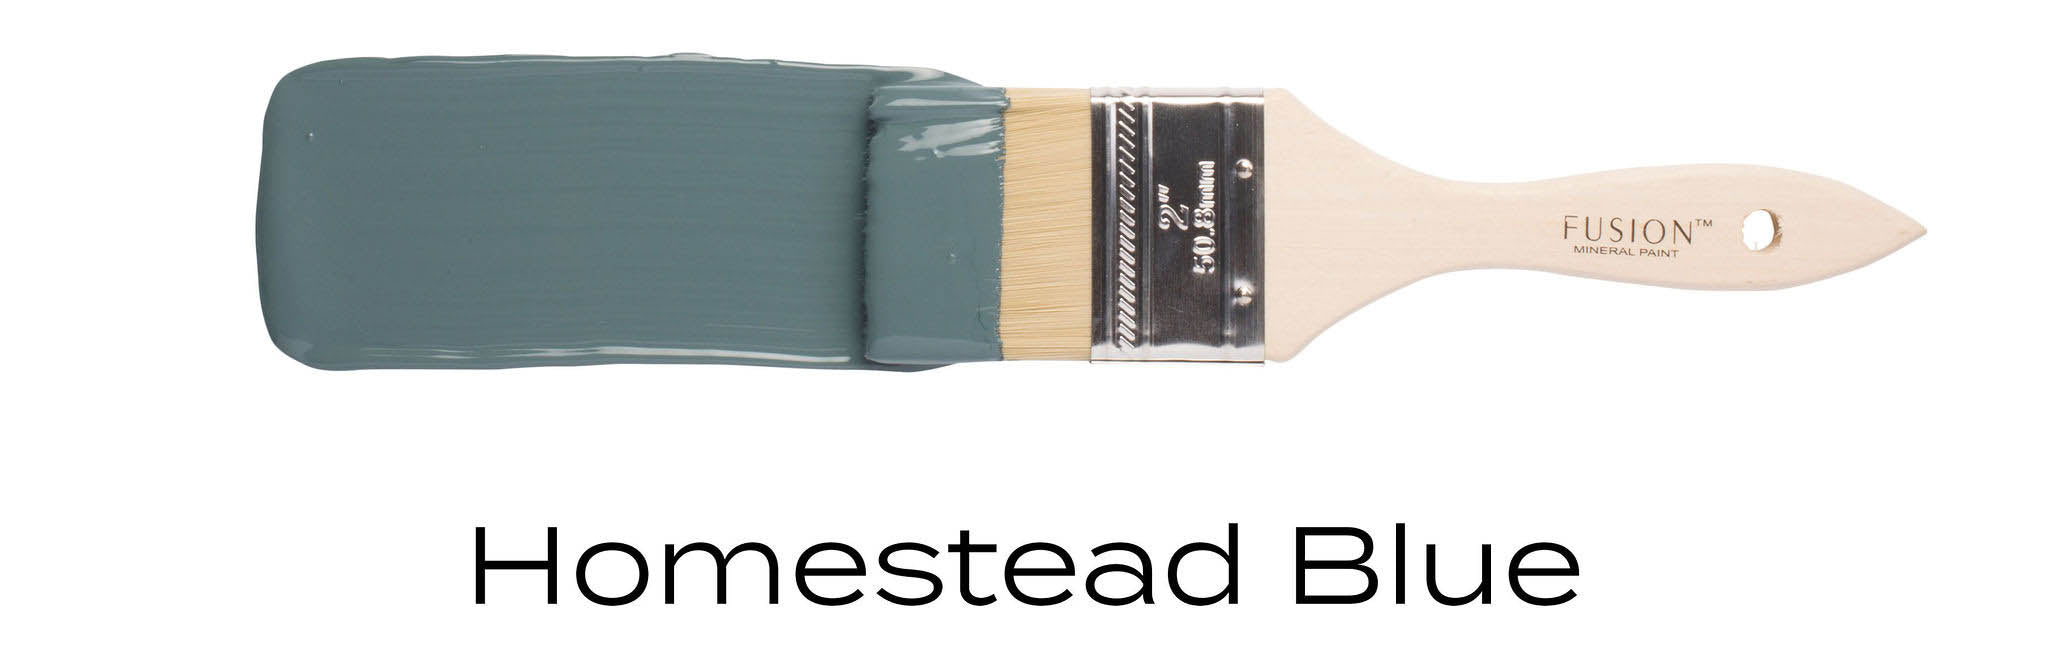 homestead blue fusion mineral paint example on paint brush